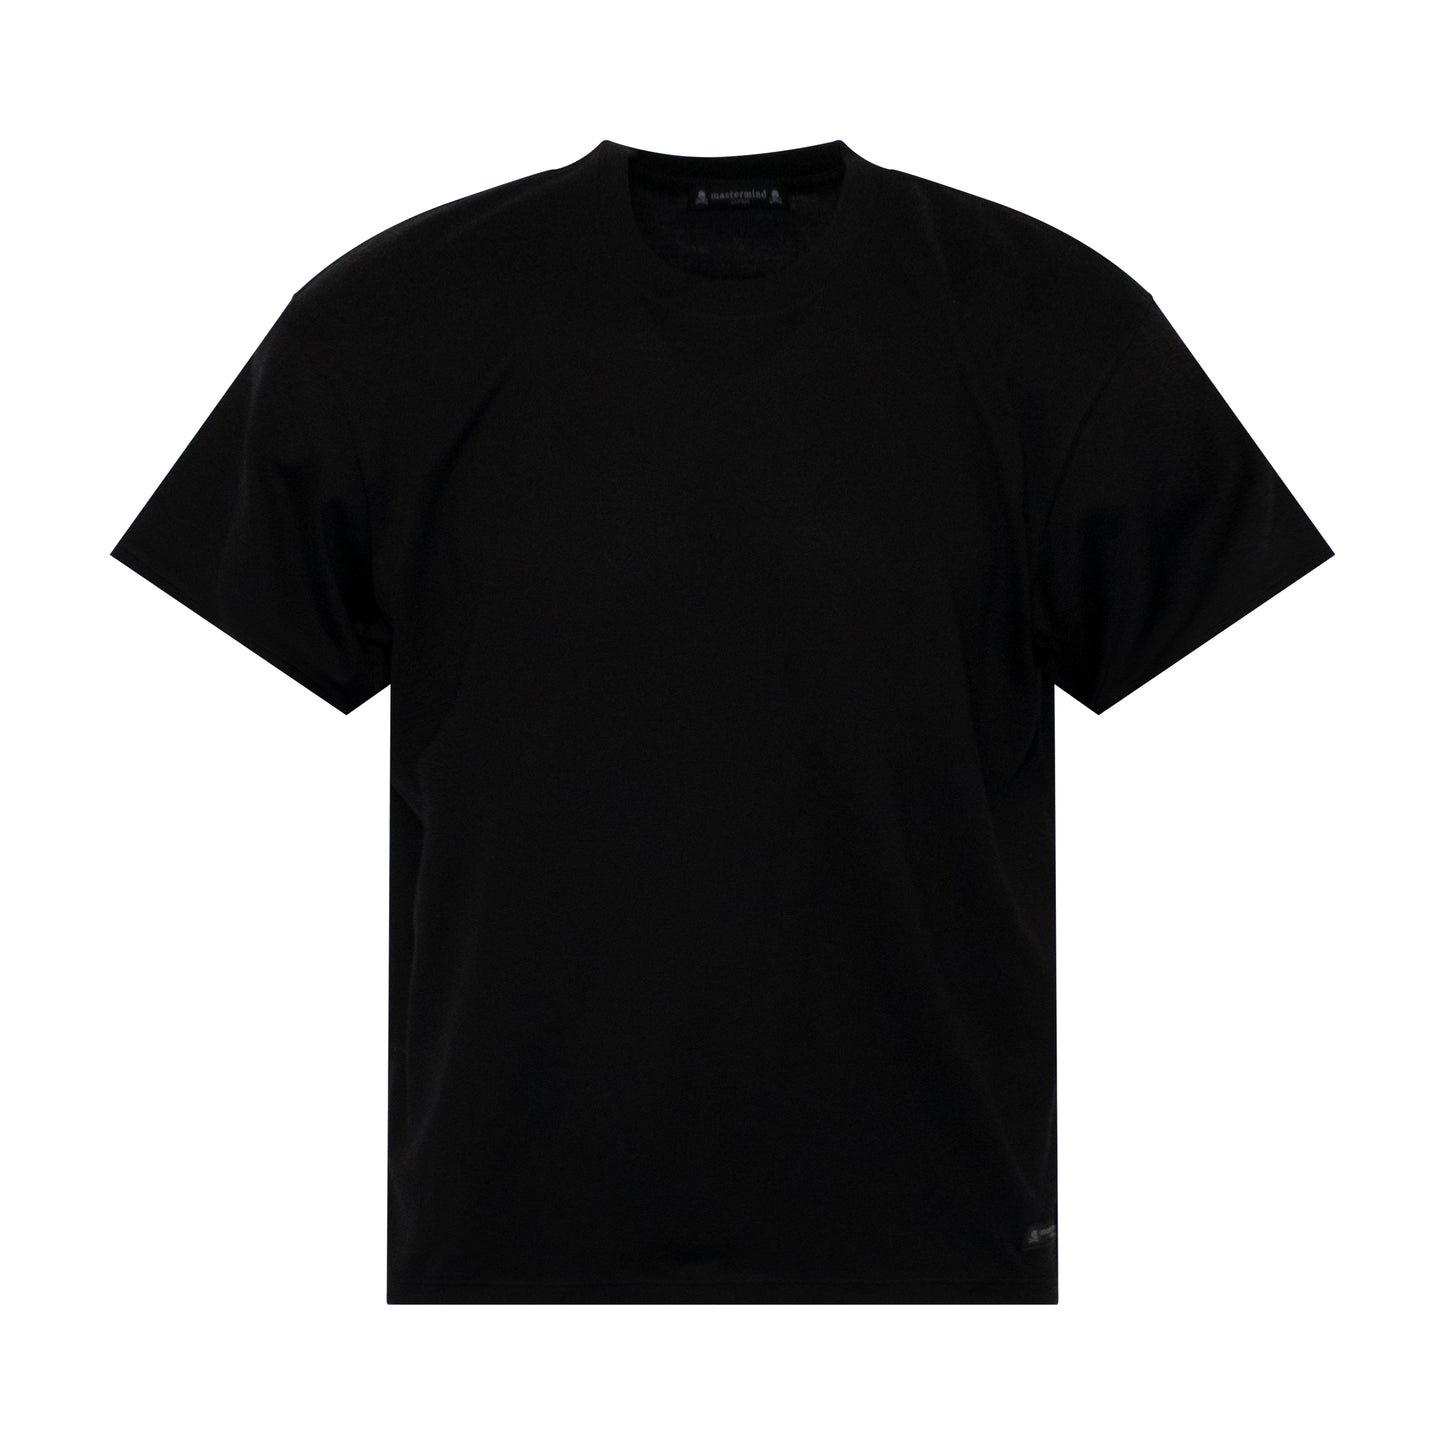 Mastermind Japan Classic T-Shirts in Black